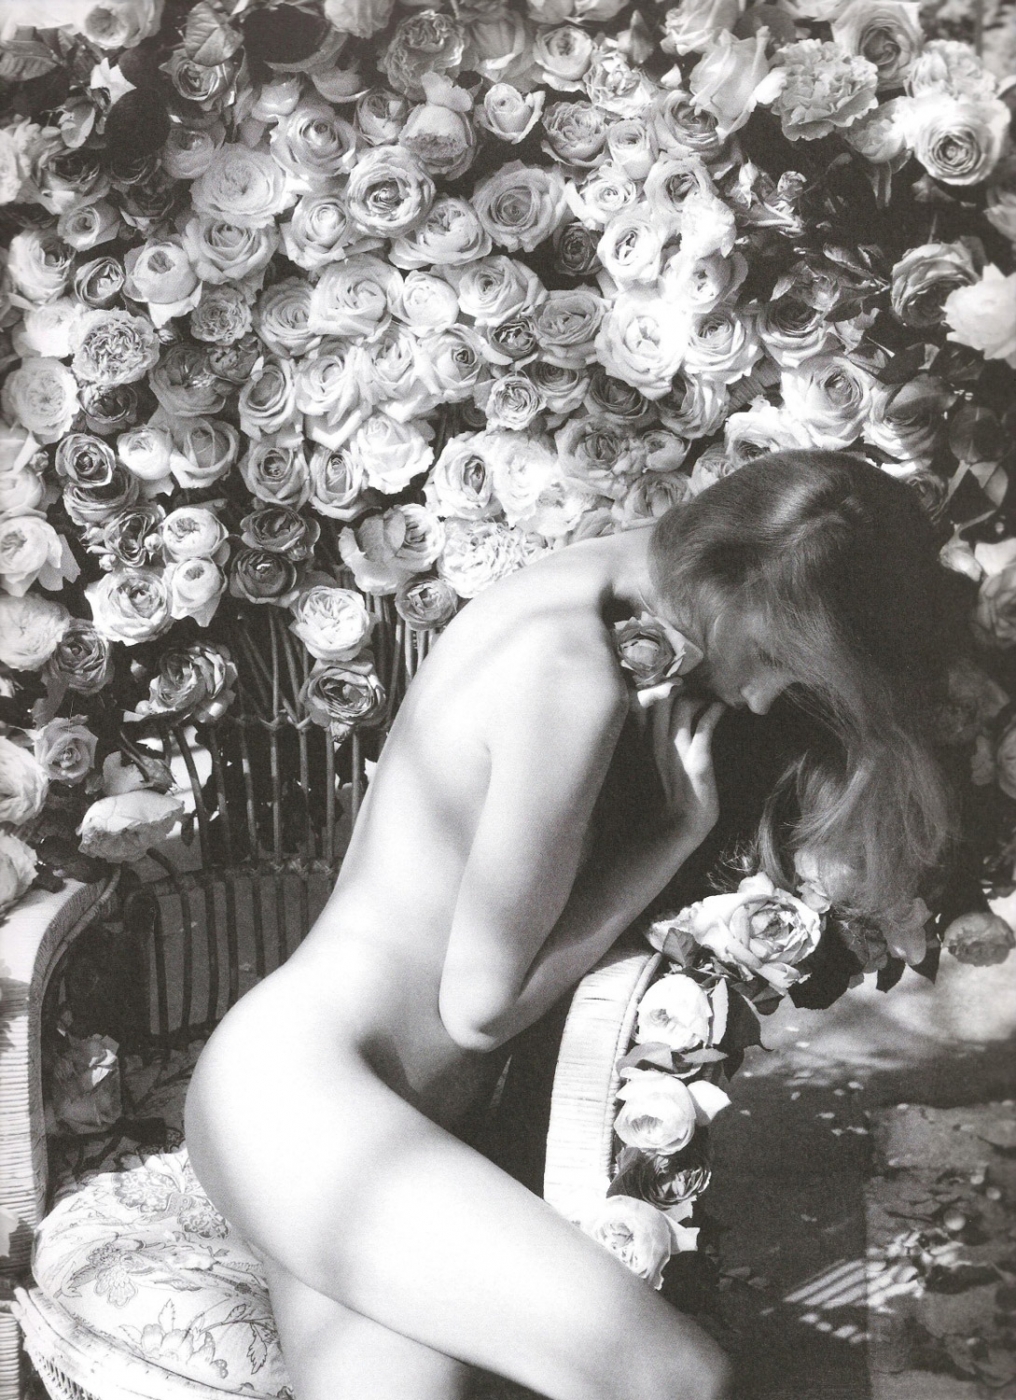 edita vilkeviciute nude on a chair in front of flowers